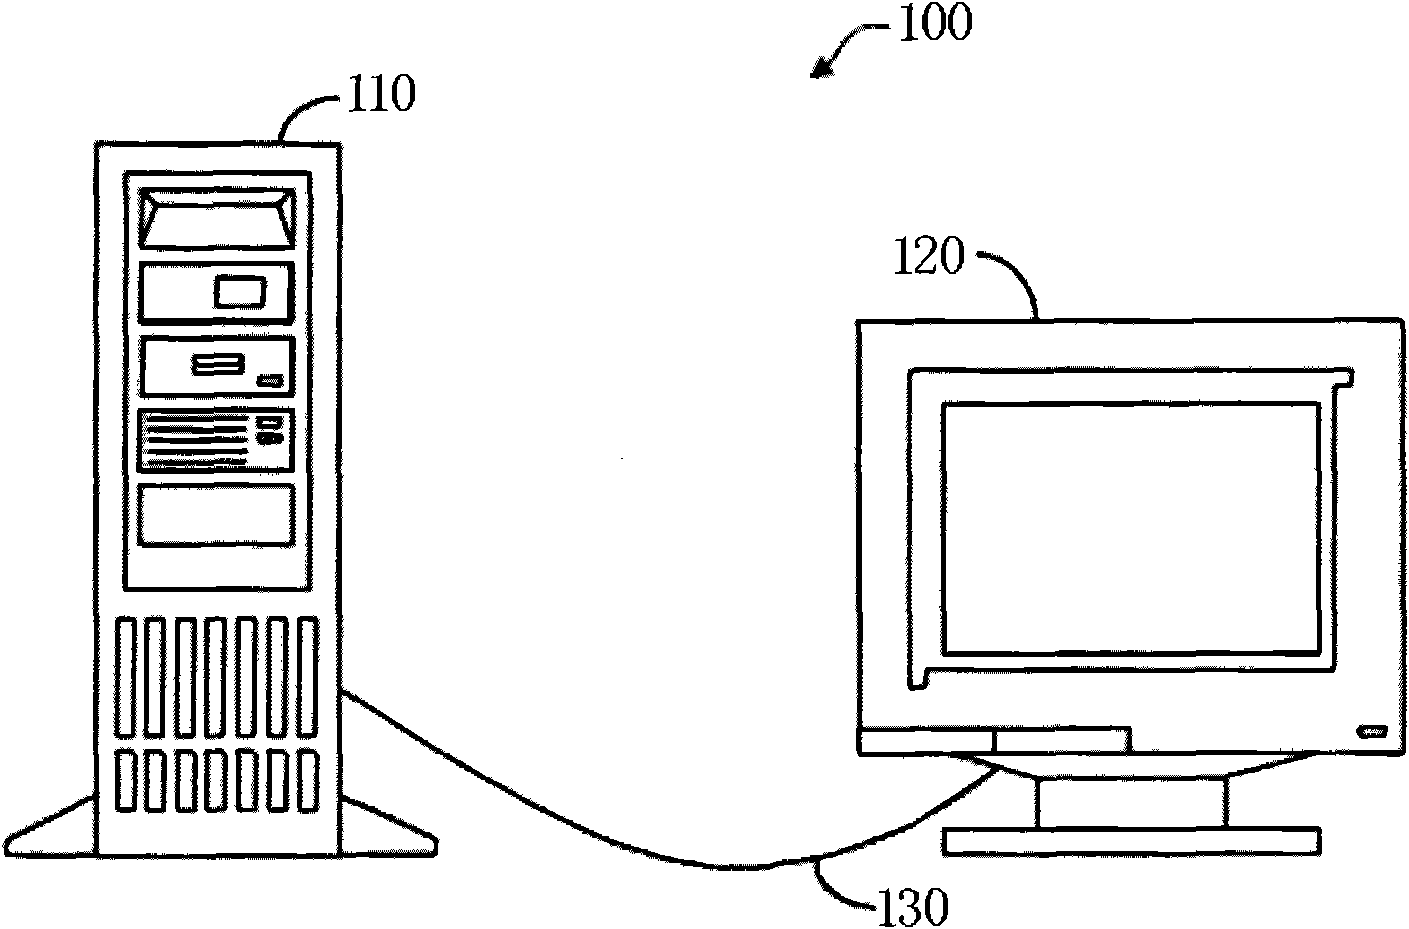 Computer, dual-mode dp and hdmi transmission device and its use